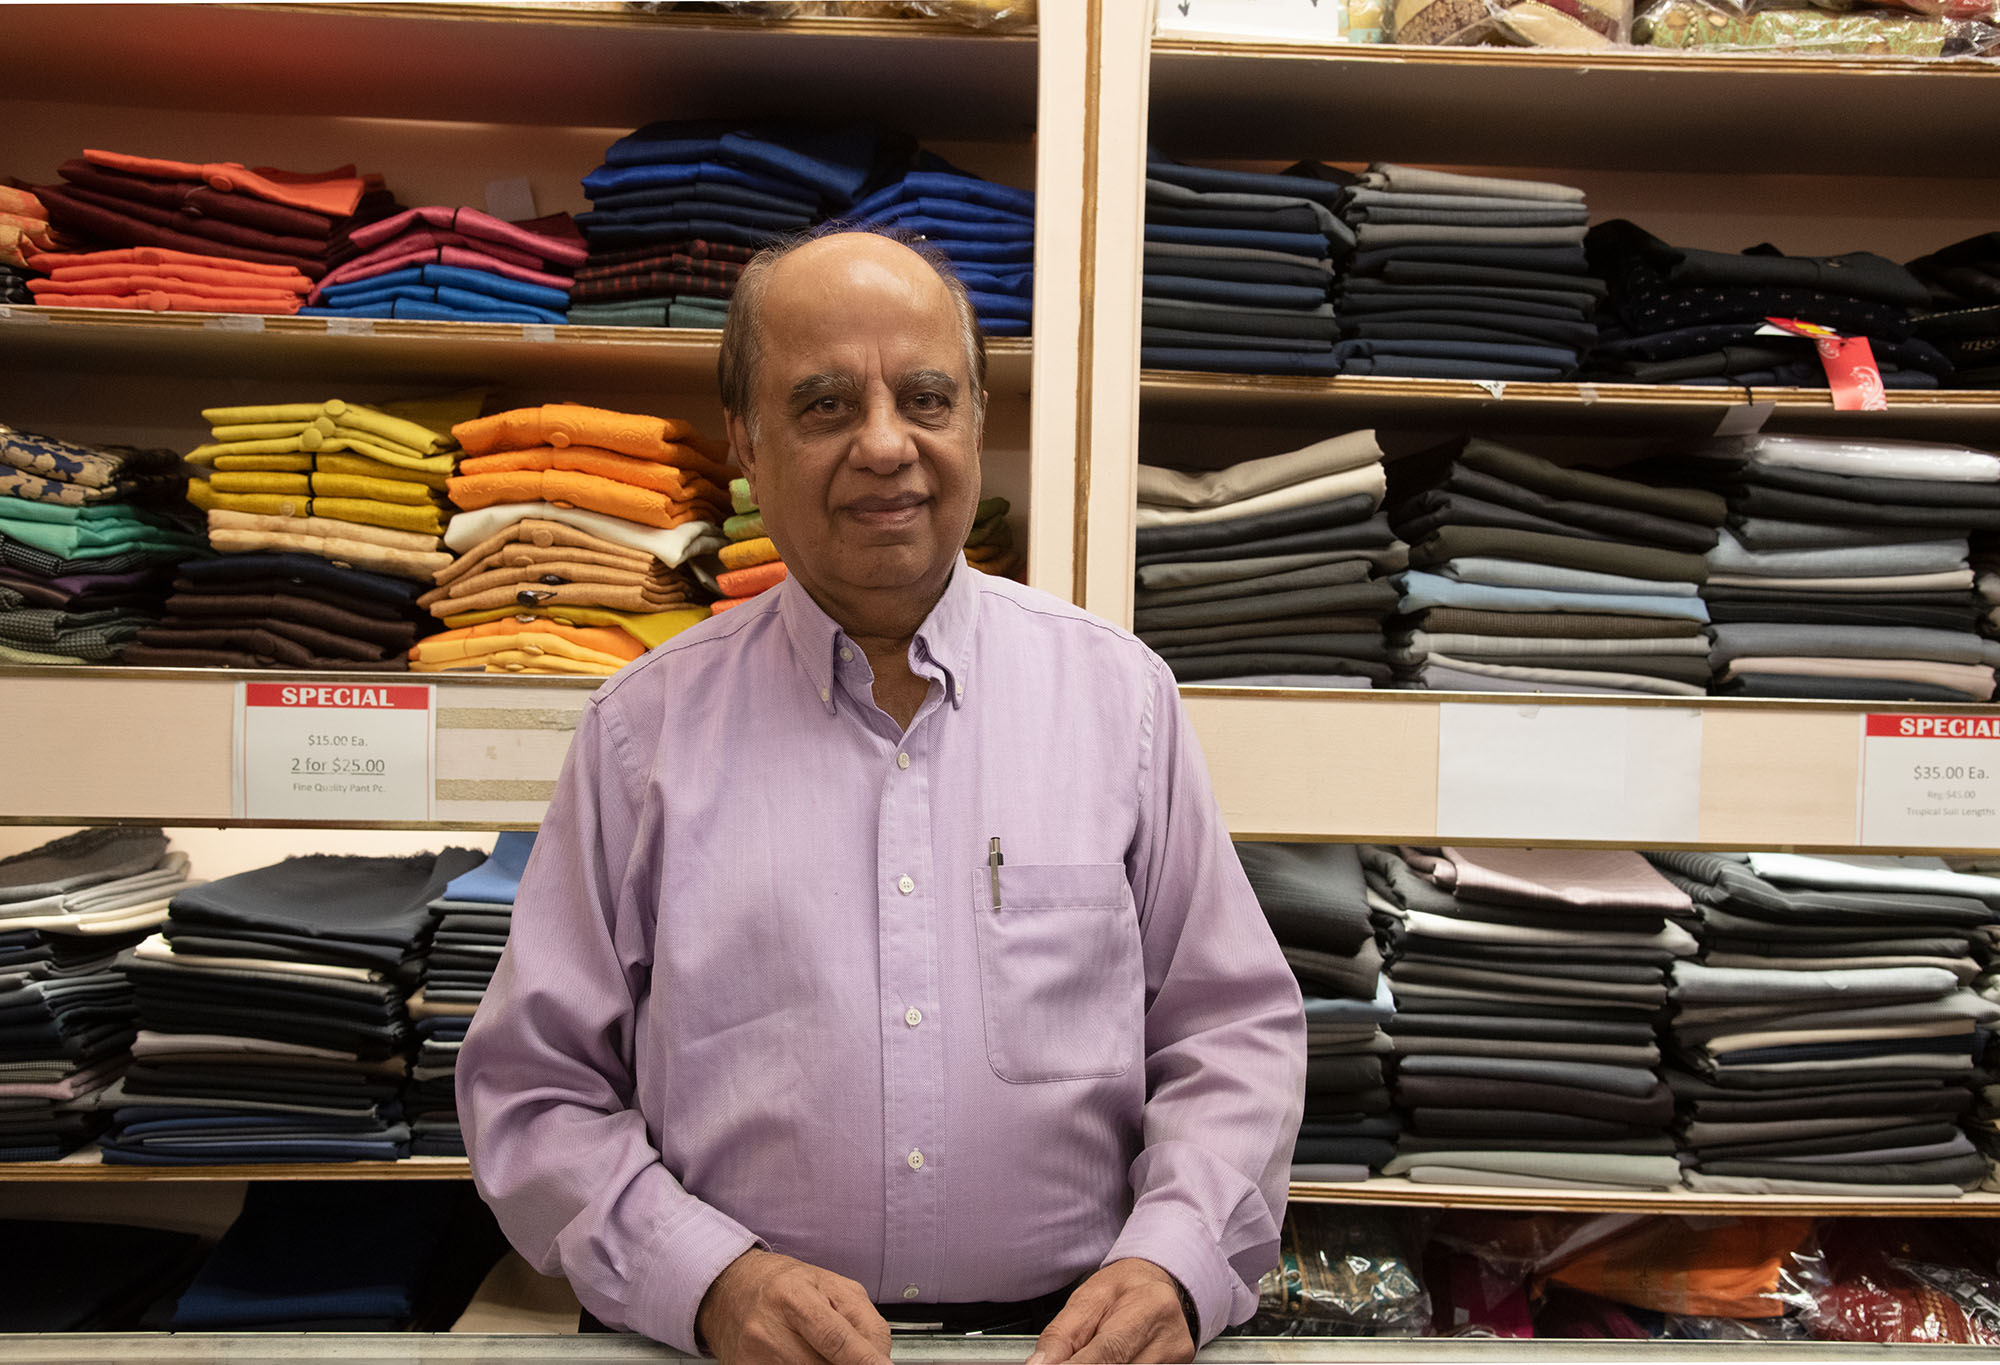 The Forgotten Tenants: New York City’s Immigrant Small Business Owners ...